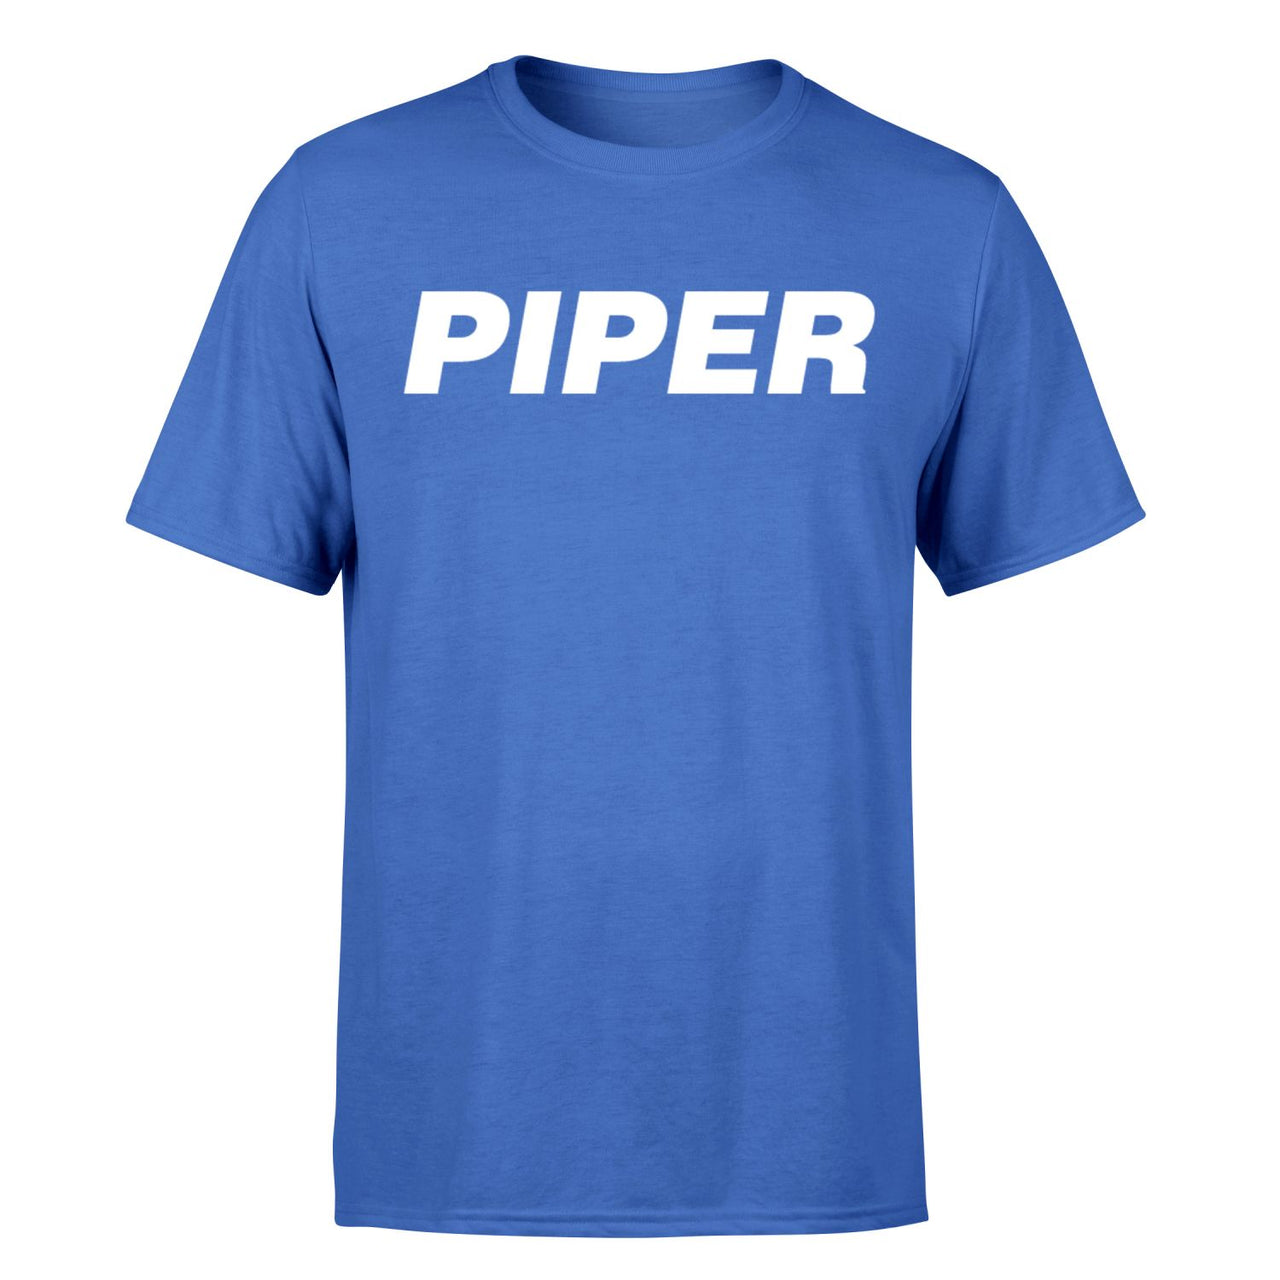 Piper & Text Designed T-Shirts